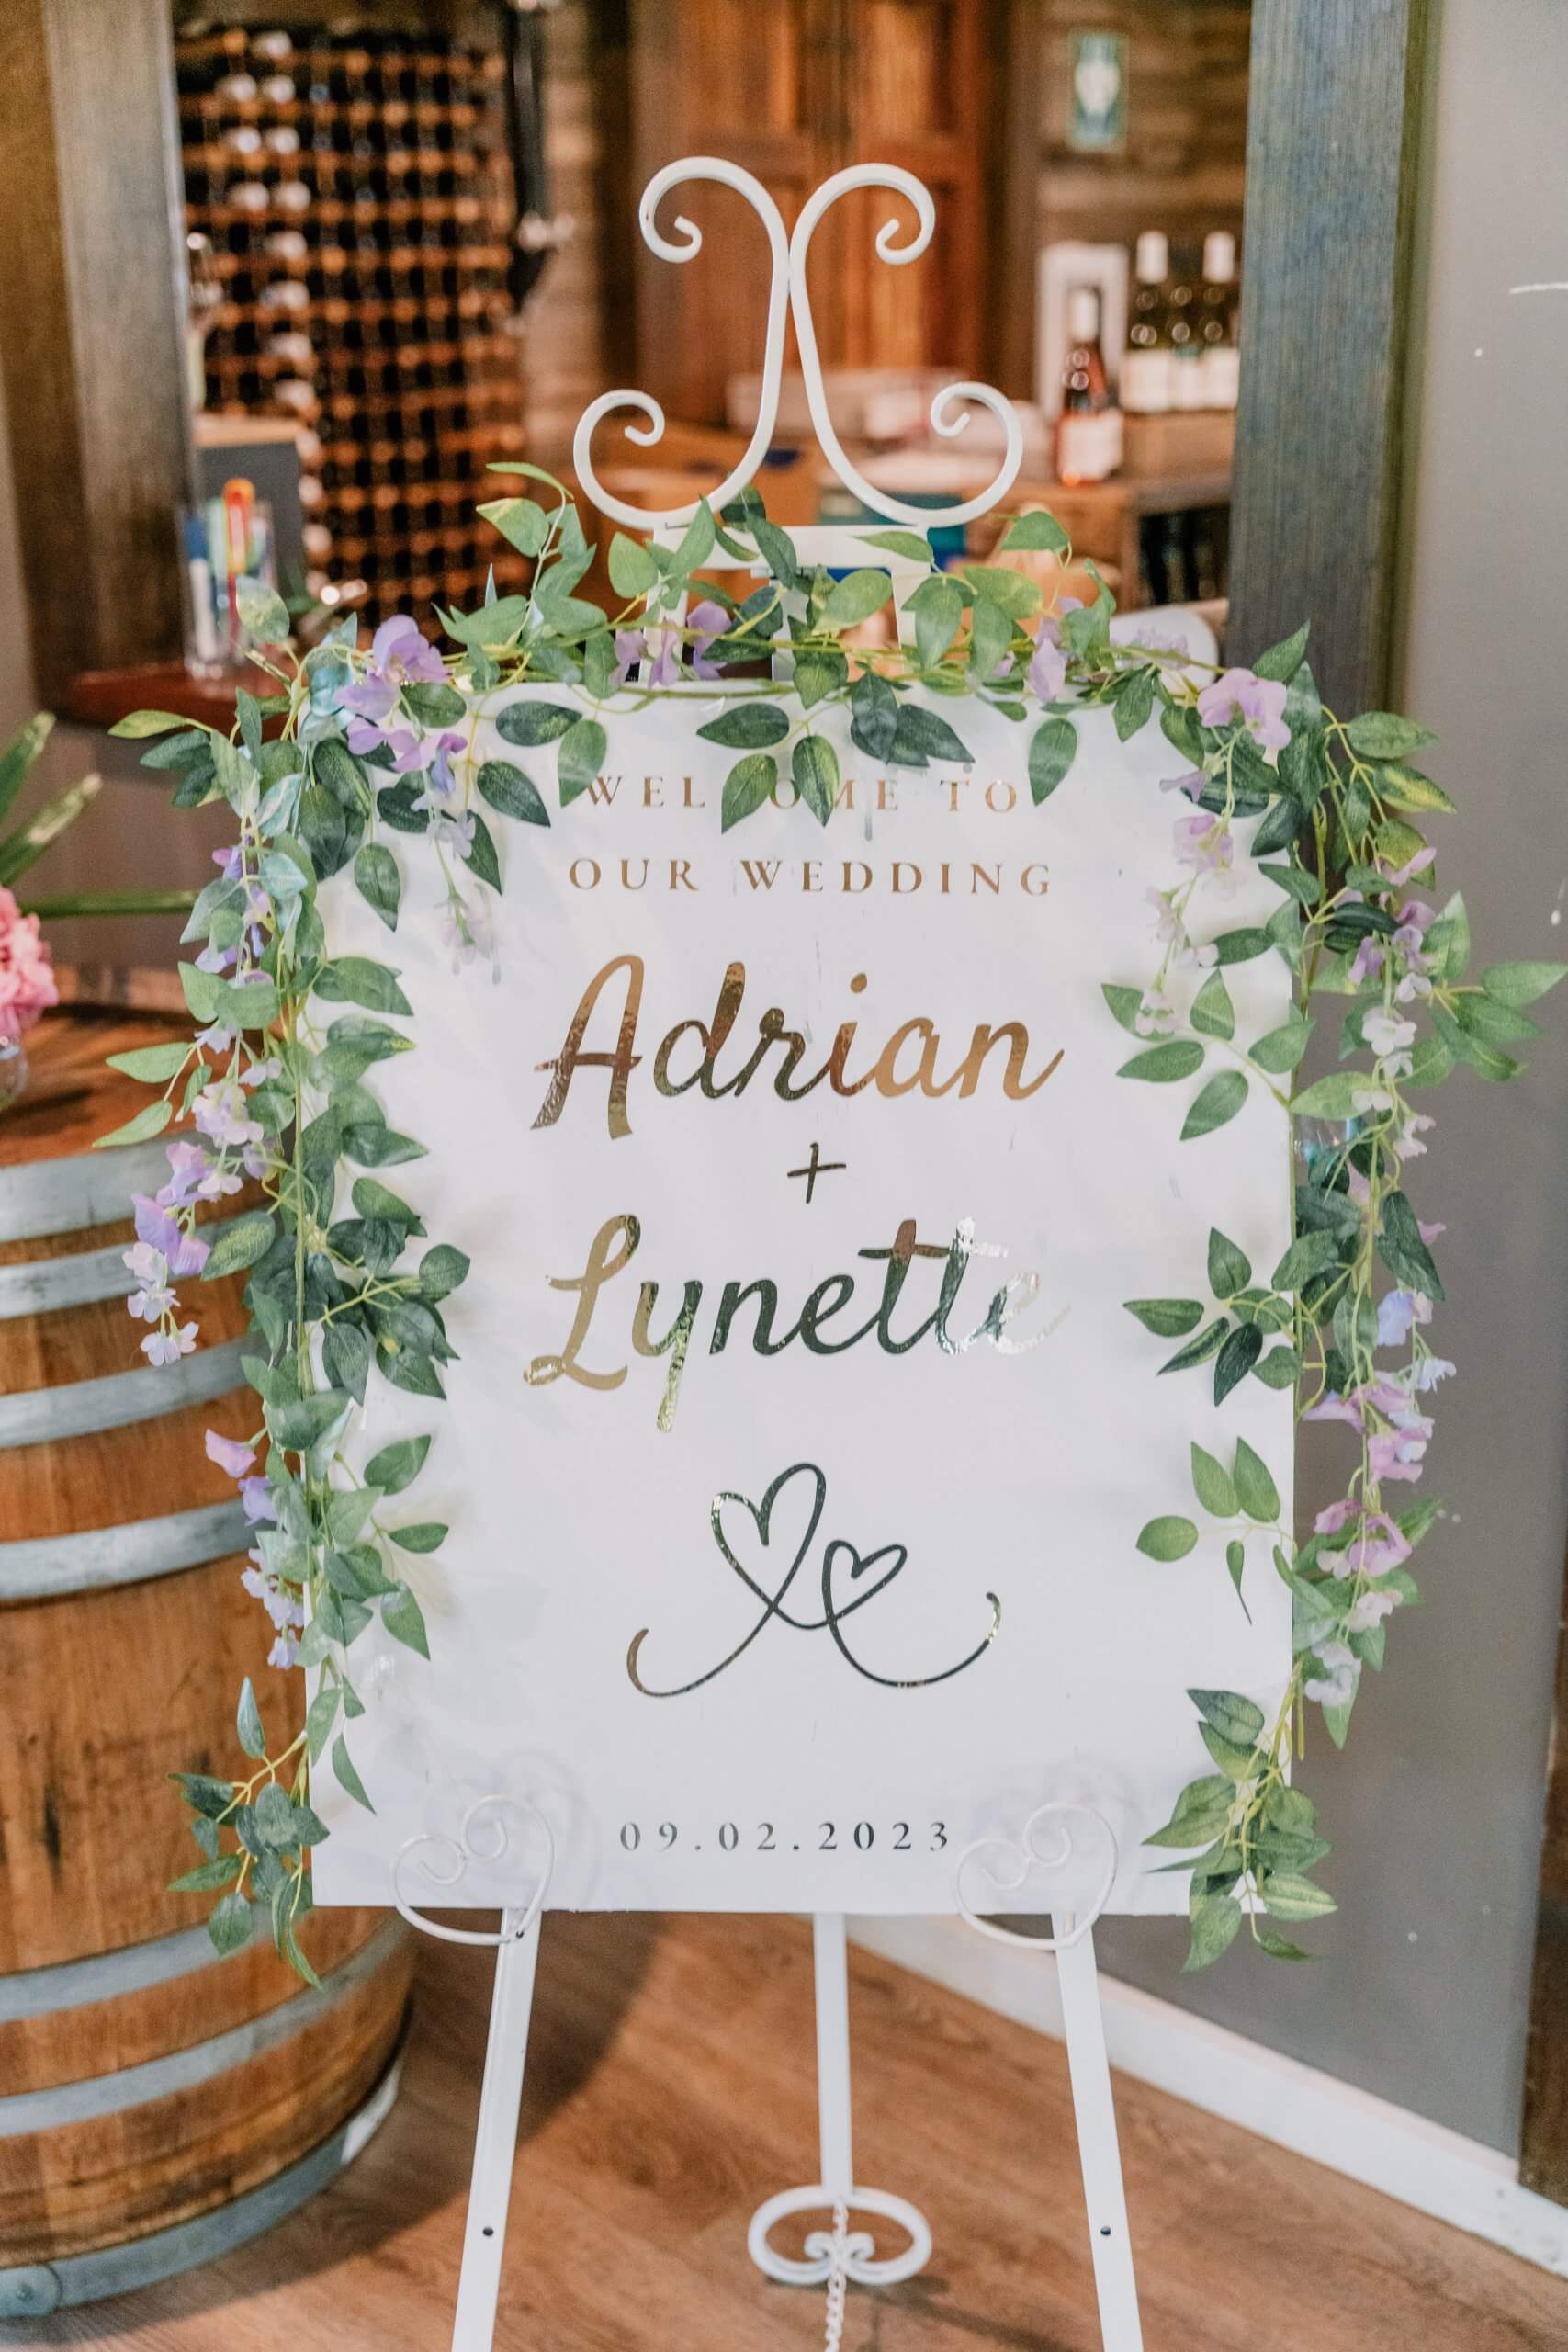 Welcome wedding signage adorned with purple and white flowers.